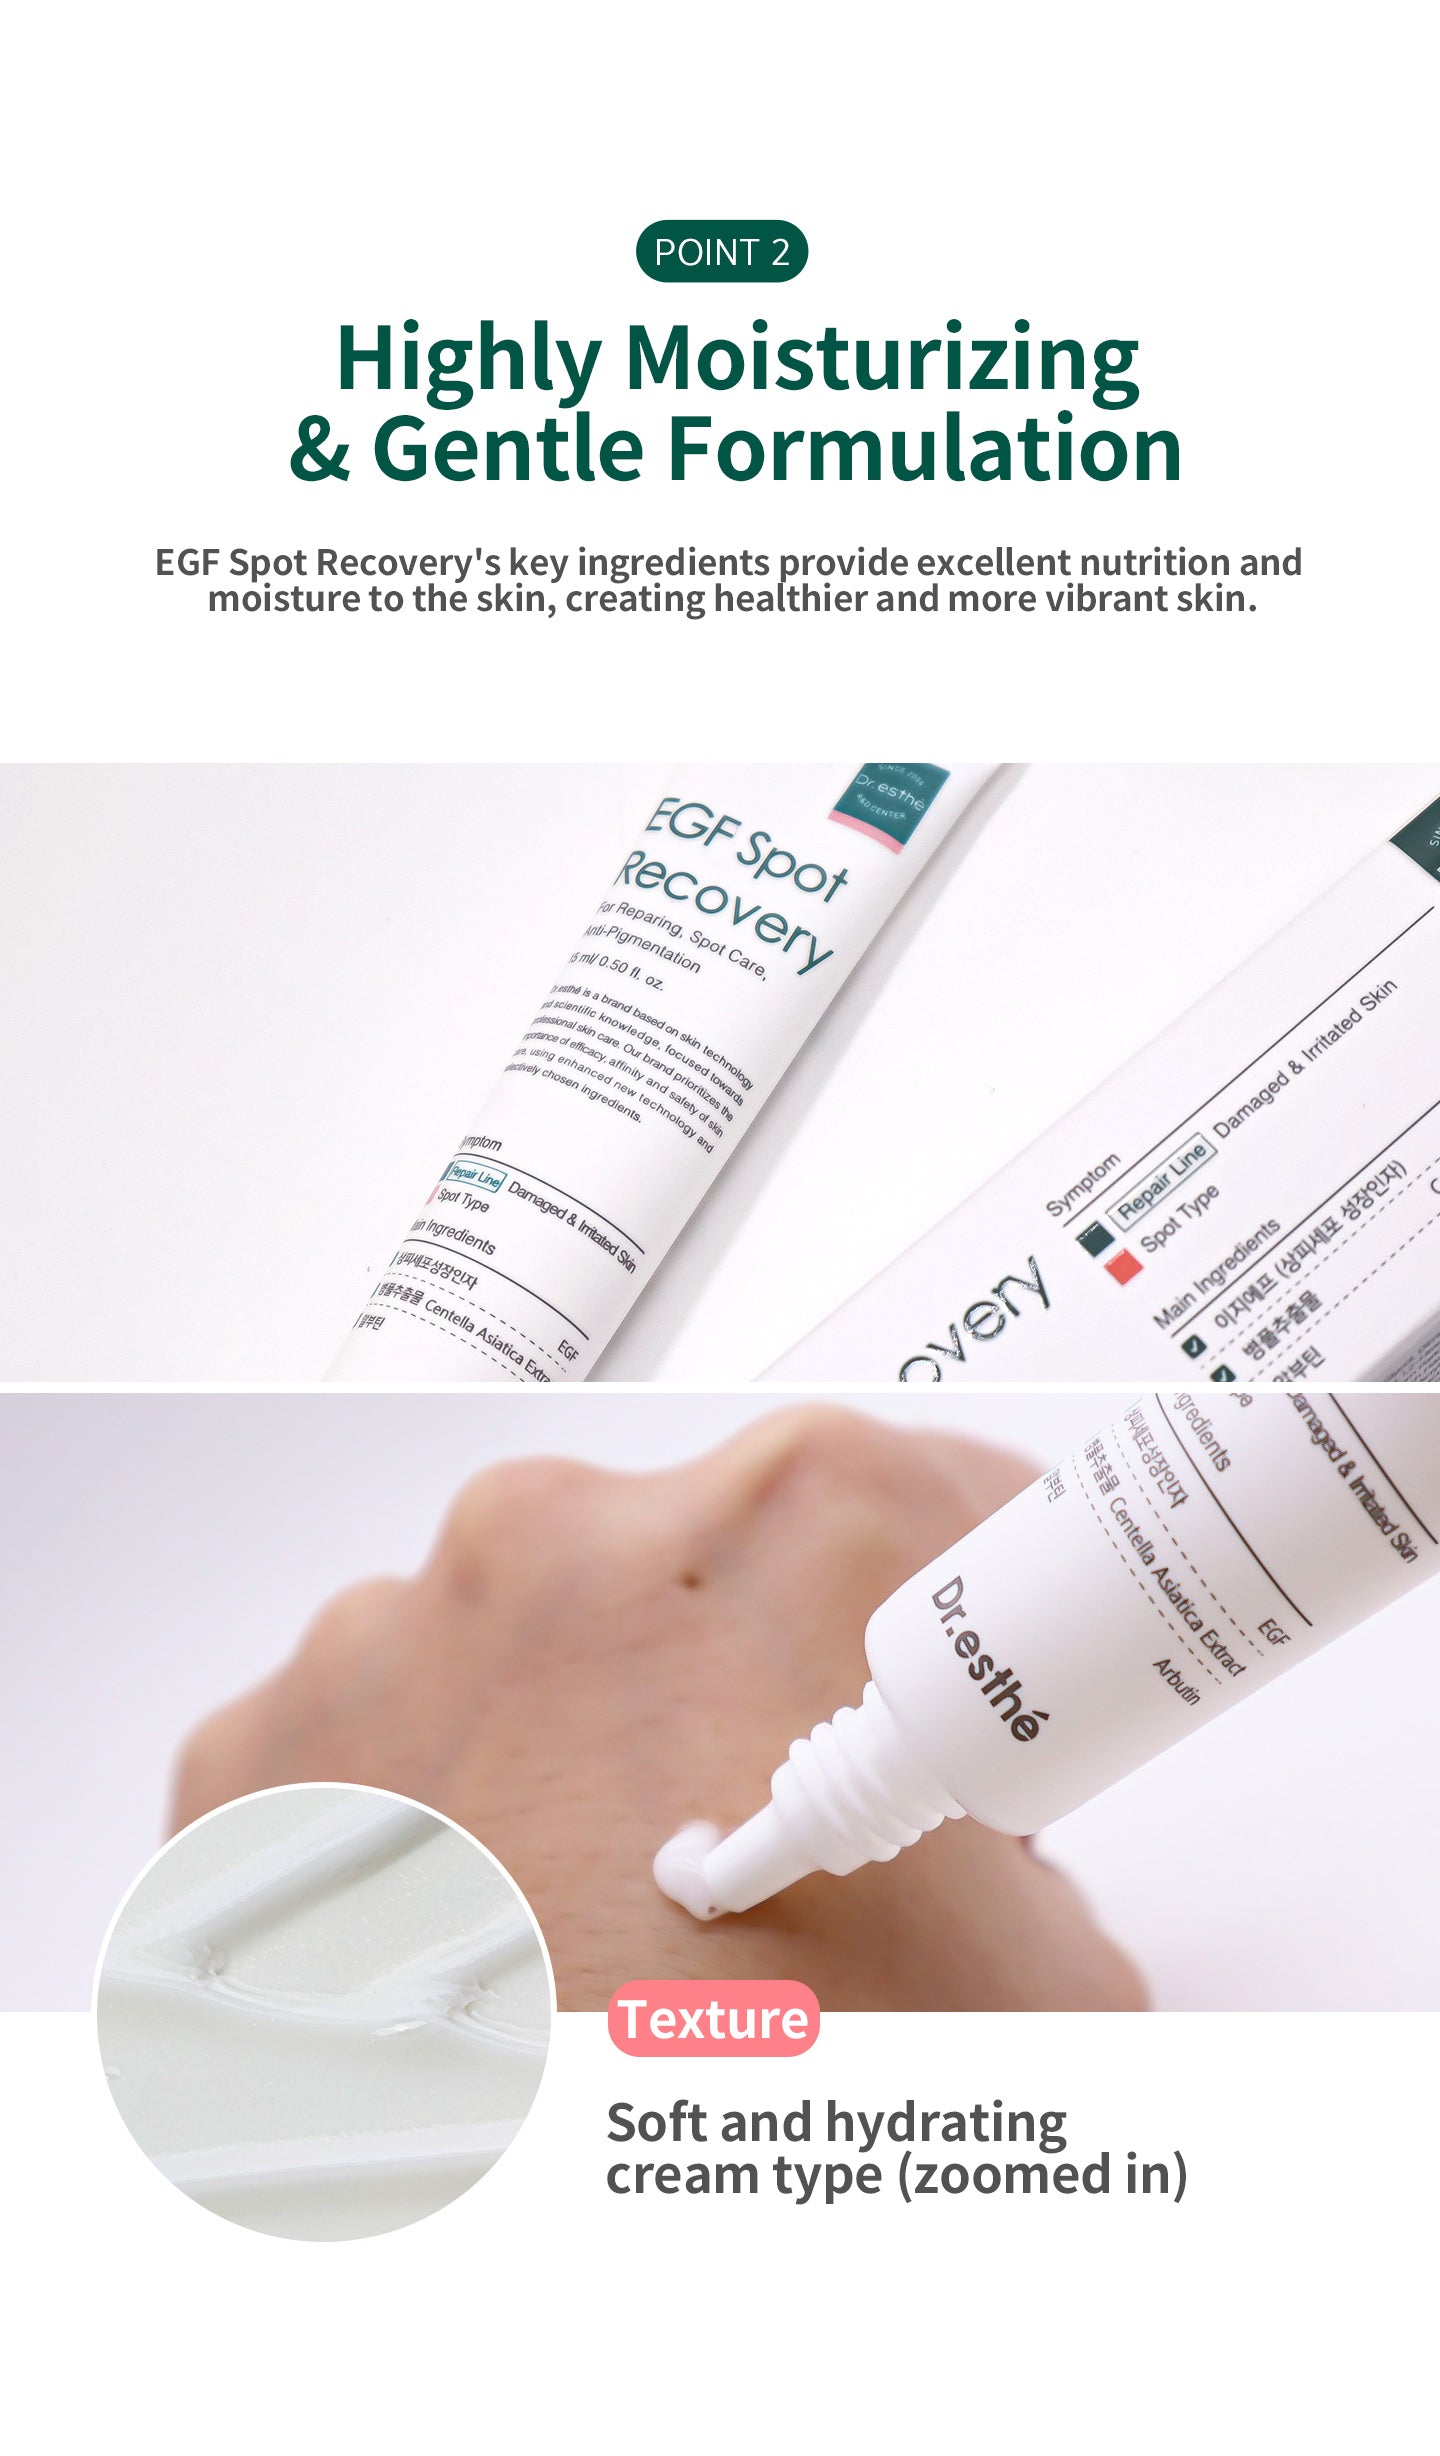 Highly moisturizing & gentle formulation. EGF spot recovery's key ingredients provide excellent nutrition and moisture to the skin, creating healthier and more vibrant skin. Soft and hydrating cream type texture. 